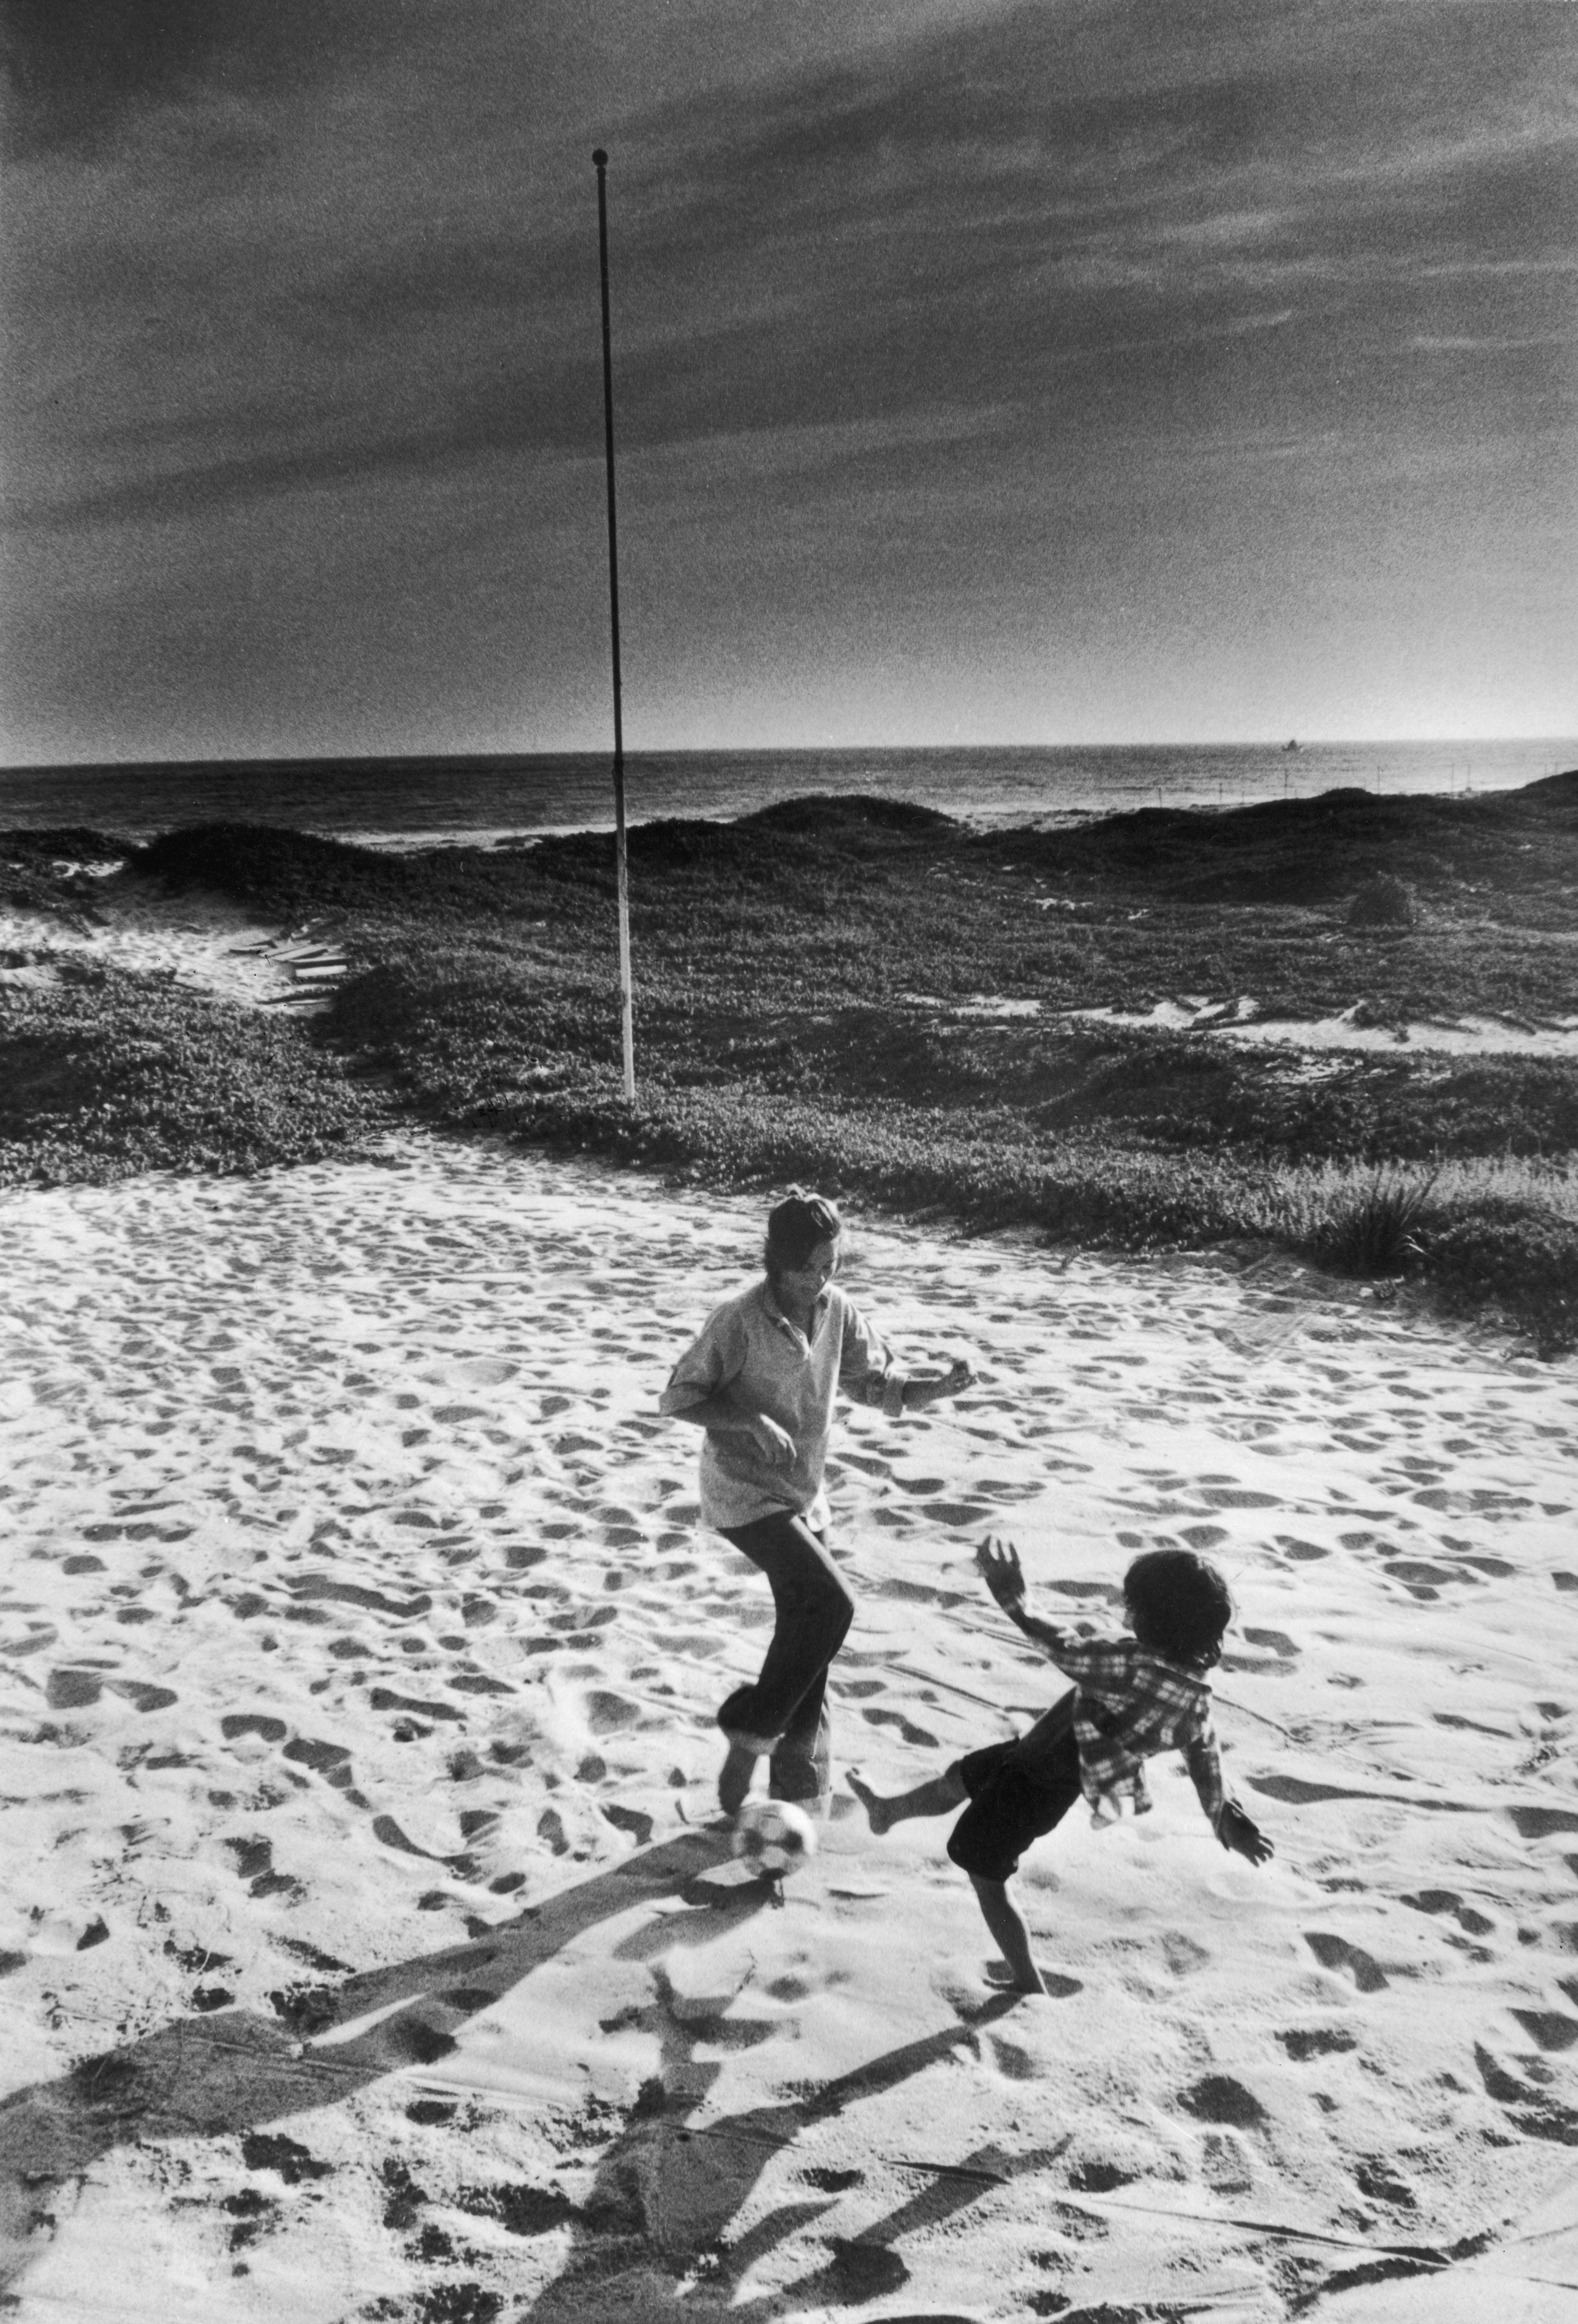 Ali MacGraw and her son Josh Evans play together on the beach in 1978 in California. | Source: Getty Images